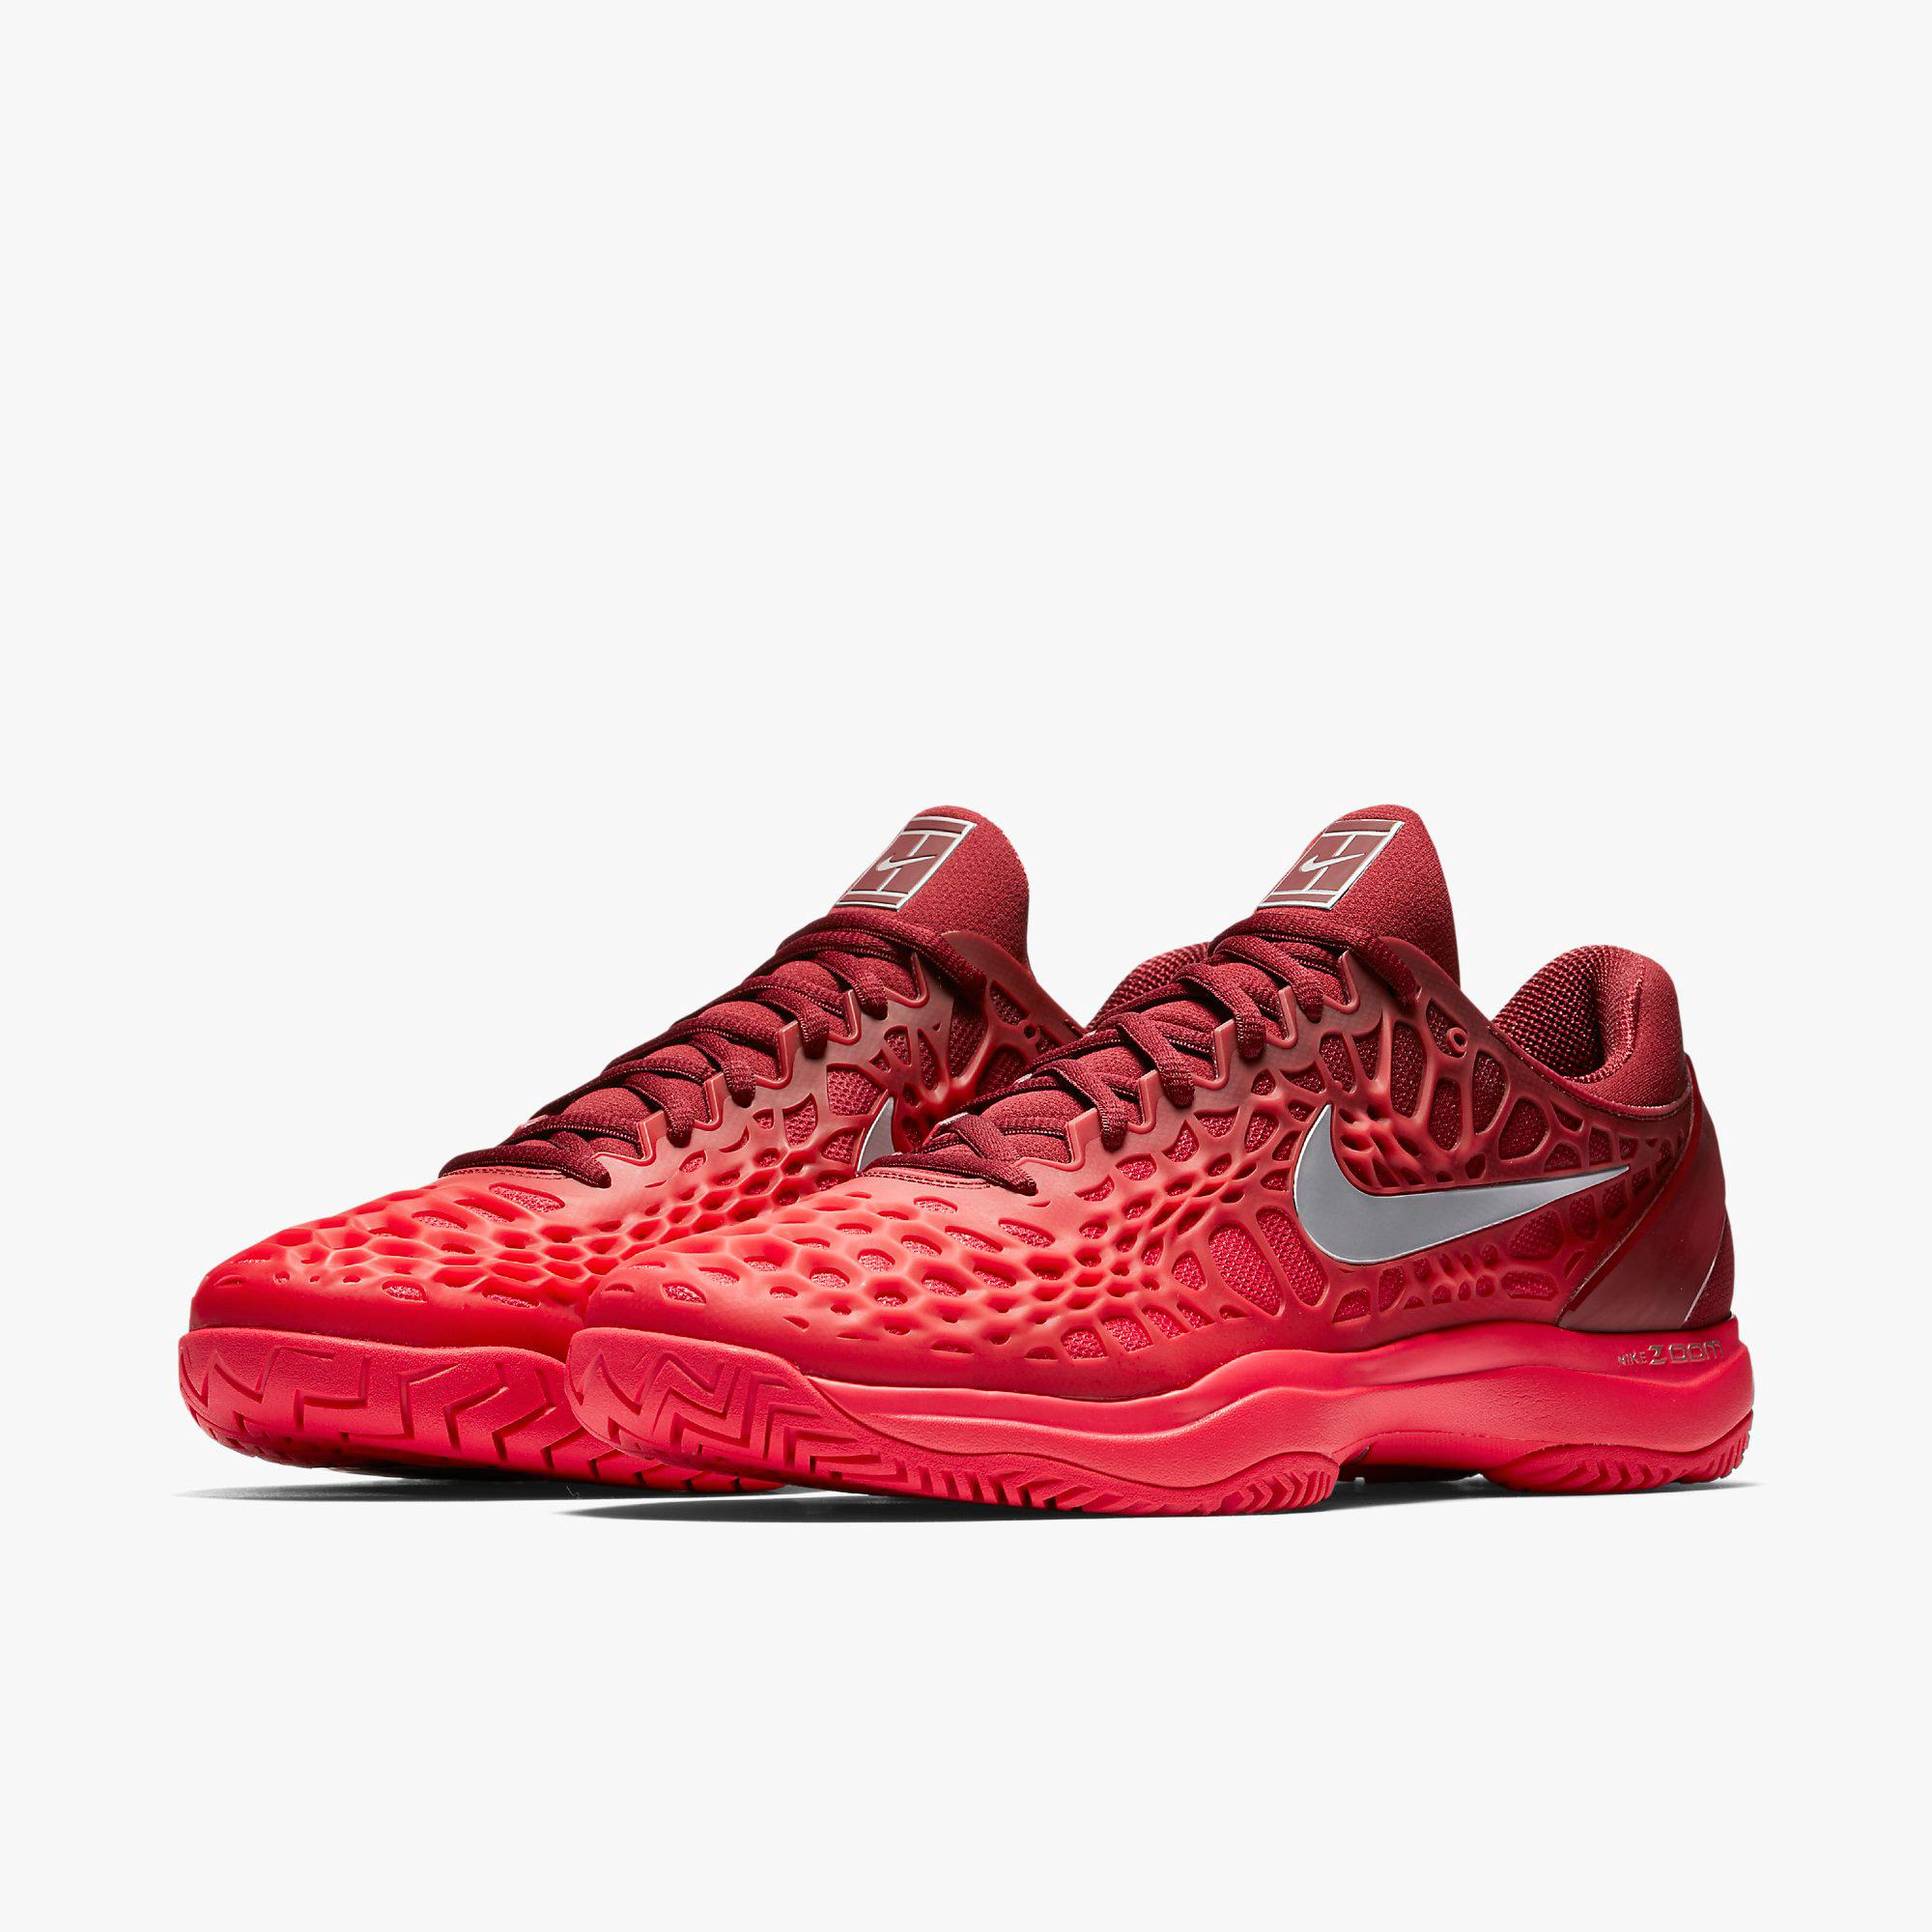 Nike Mens Zoom Cage Tennis Shoes Team Red/Siren Red | lupon.gov.ph